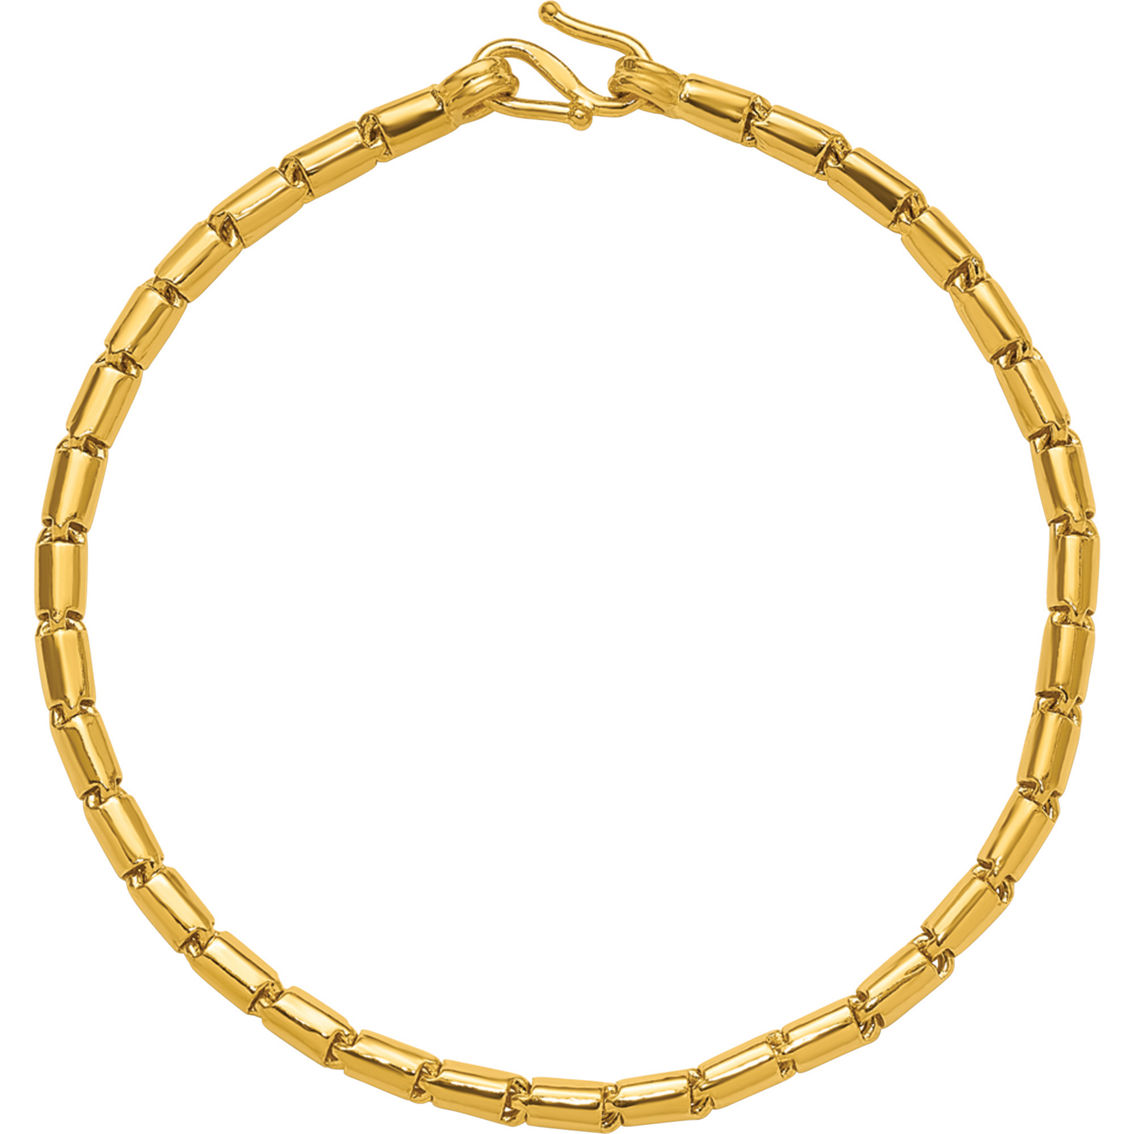 24K Pure Gold 3.2mm Solid Medium Round Barrel Link Chain 8 in. Bracelet - Image 2 of 5